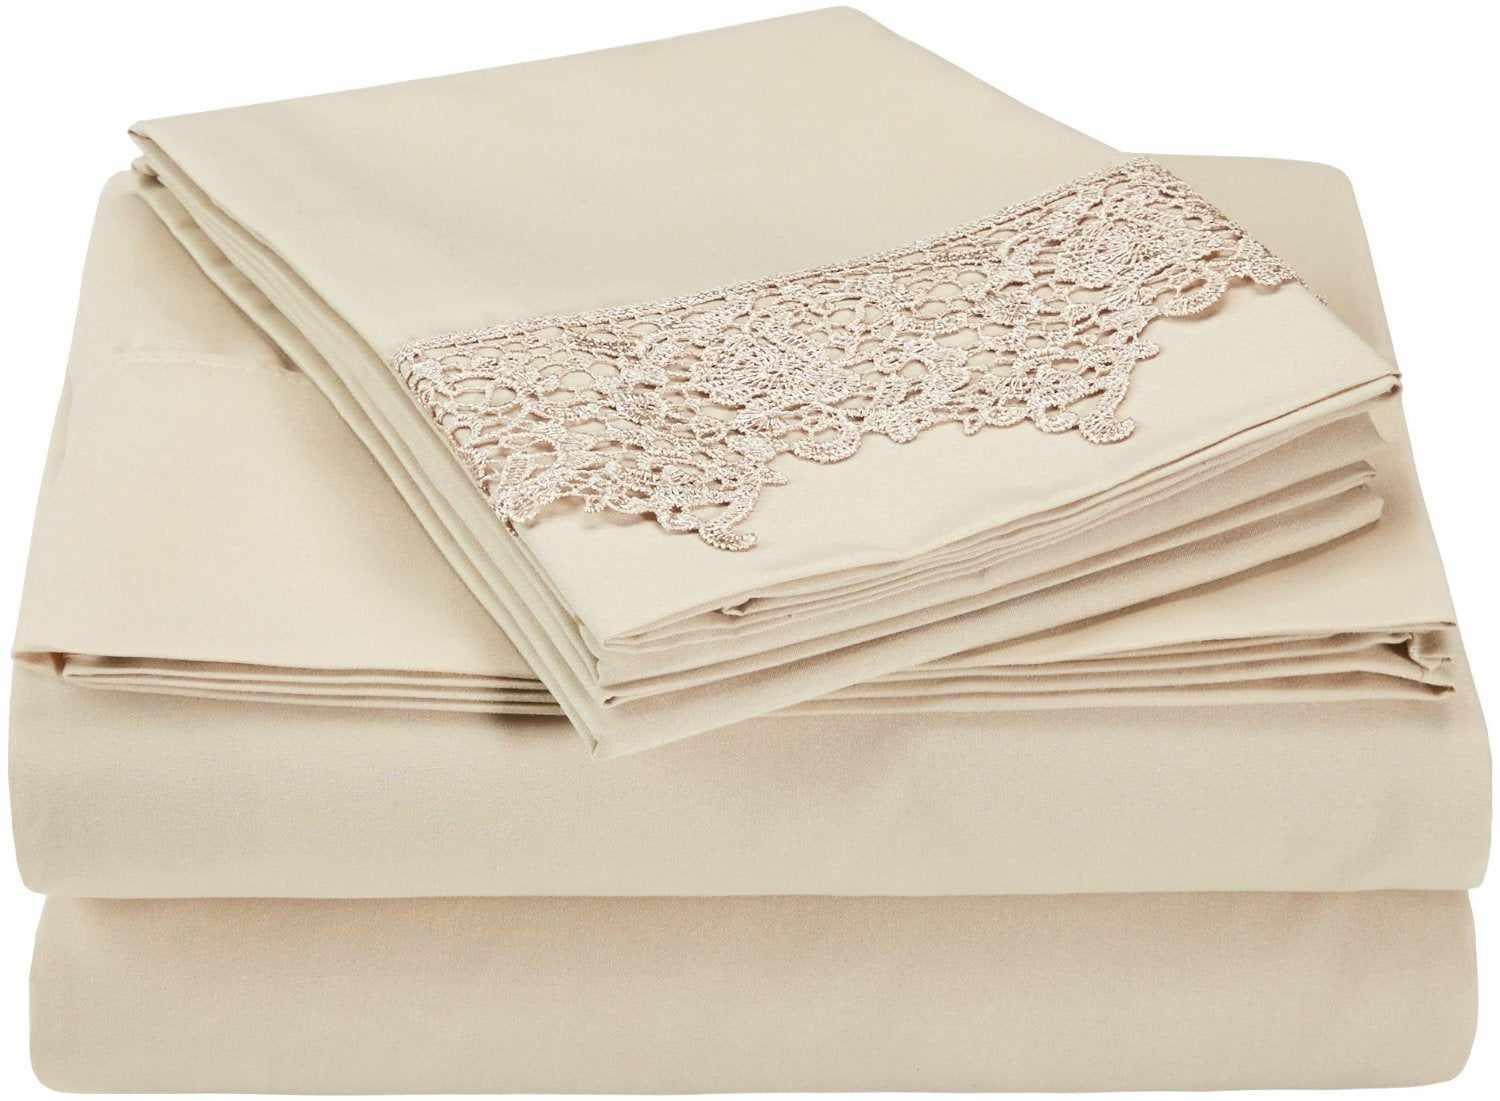 Superior Lace Overlay Solid Wrinkle Resistant Sheet Set  - Tan